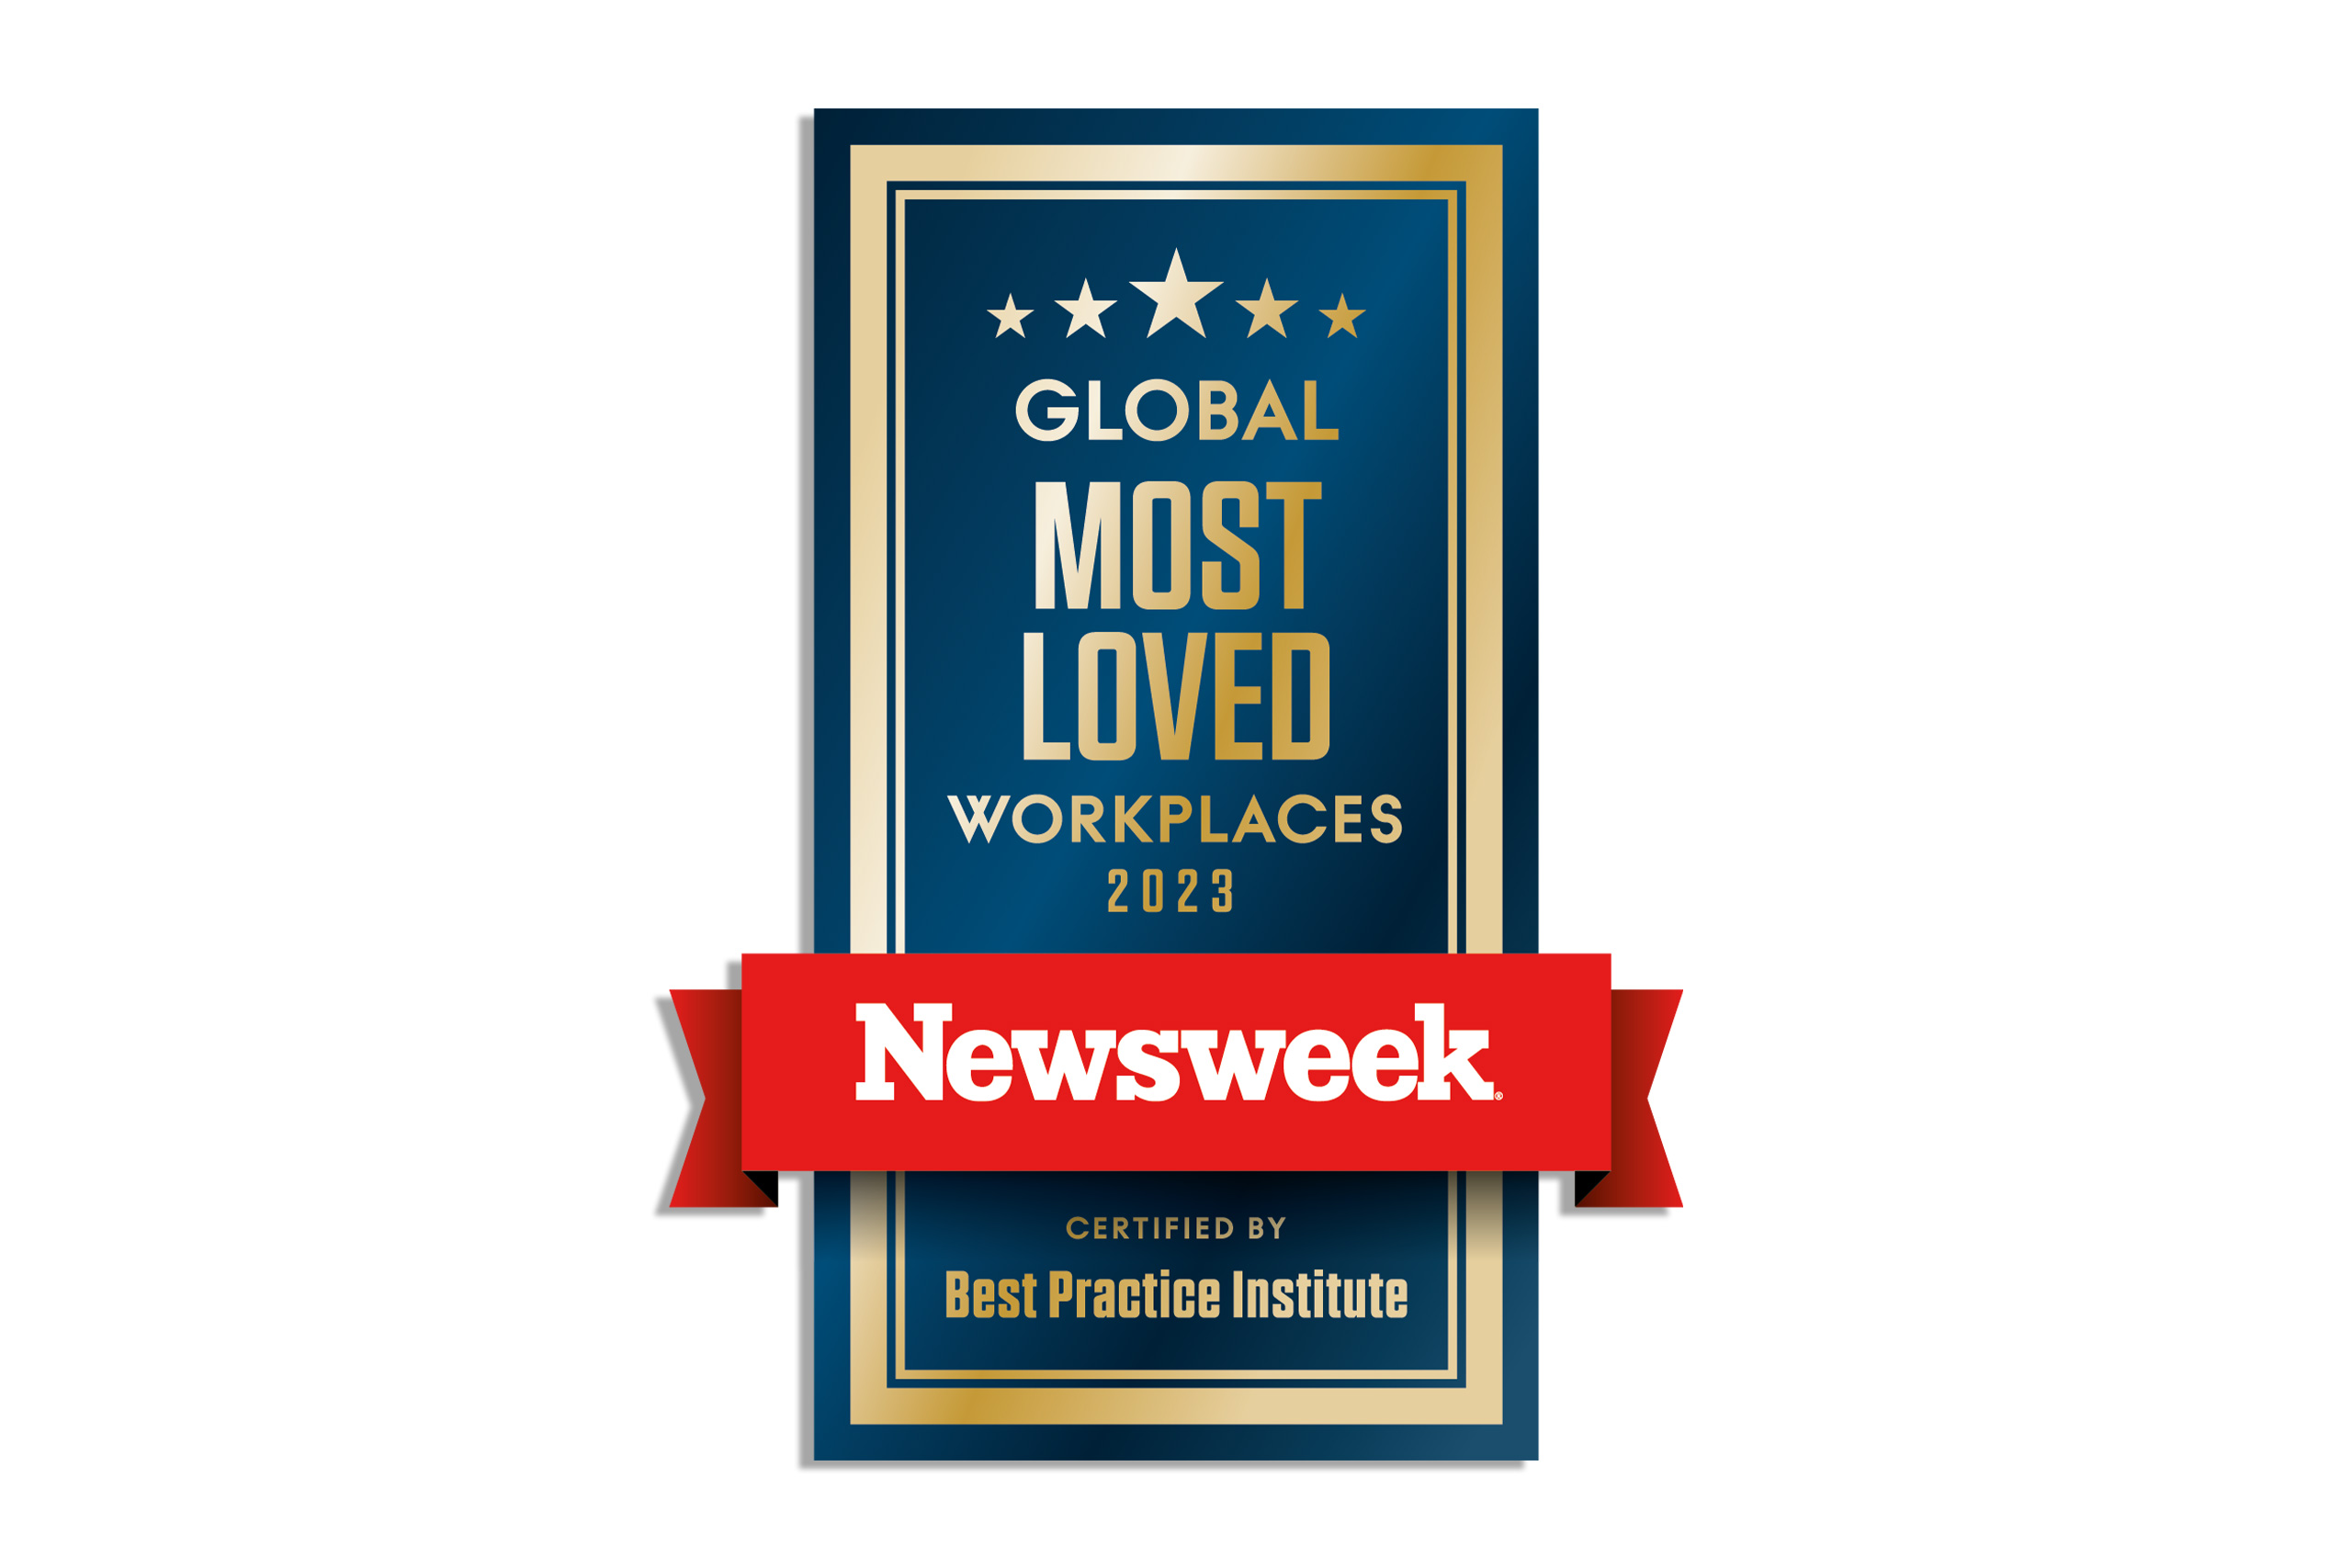 Greif unter den Top 100 GLOBAL MOST LOVED WORKPLACES